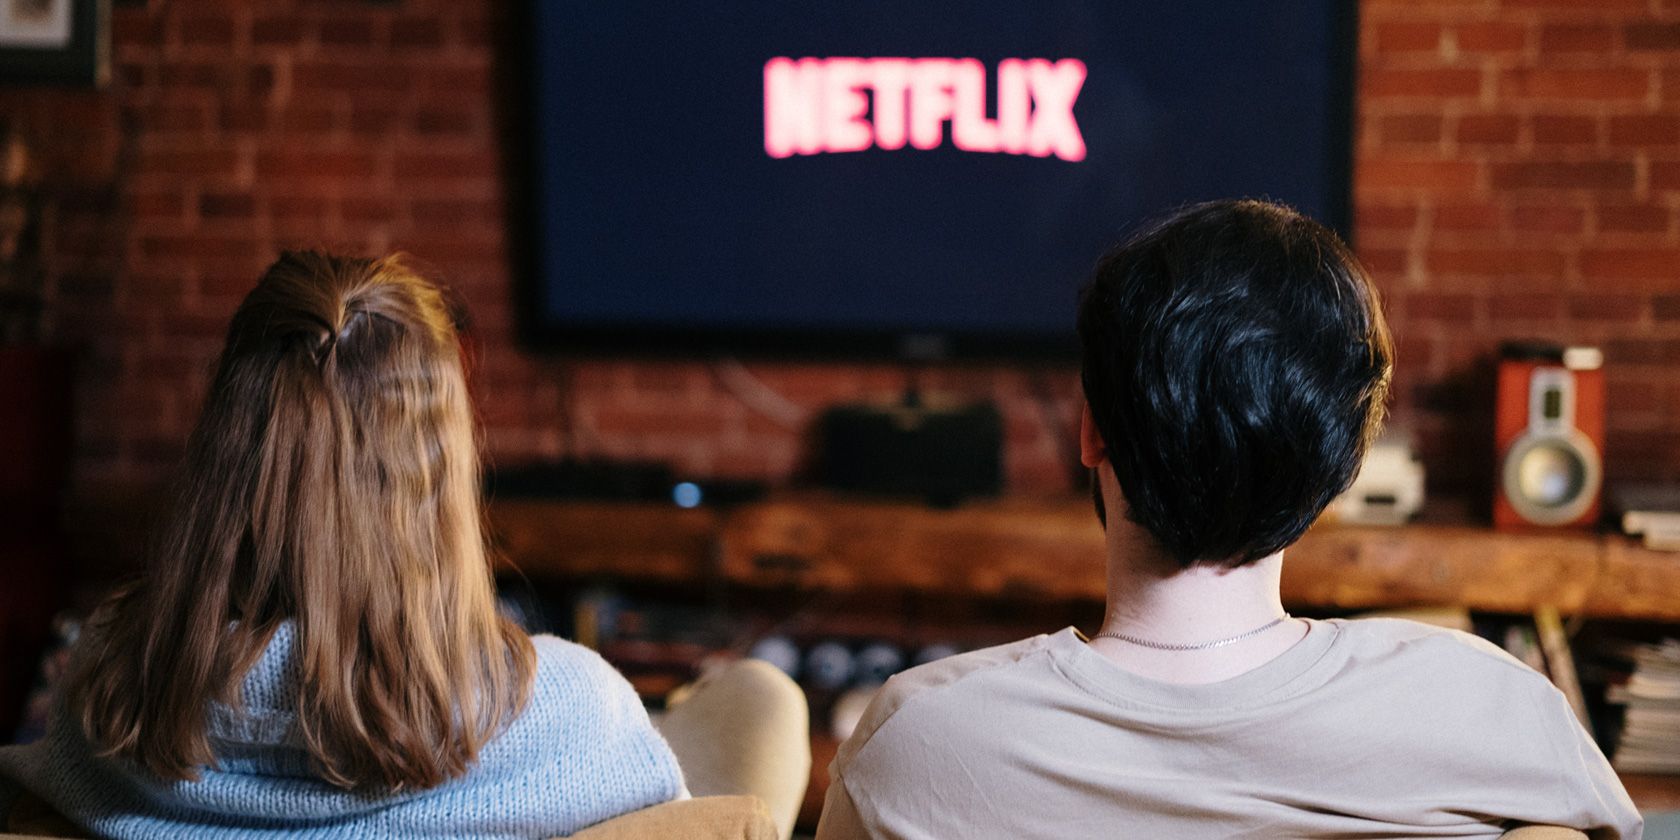 The 10 Best Netflix and Chill Movies for Couples to Watch on Date Night